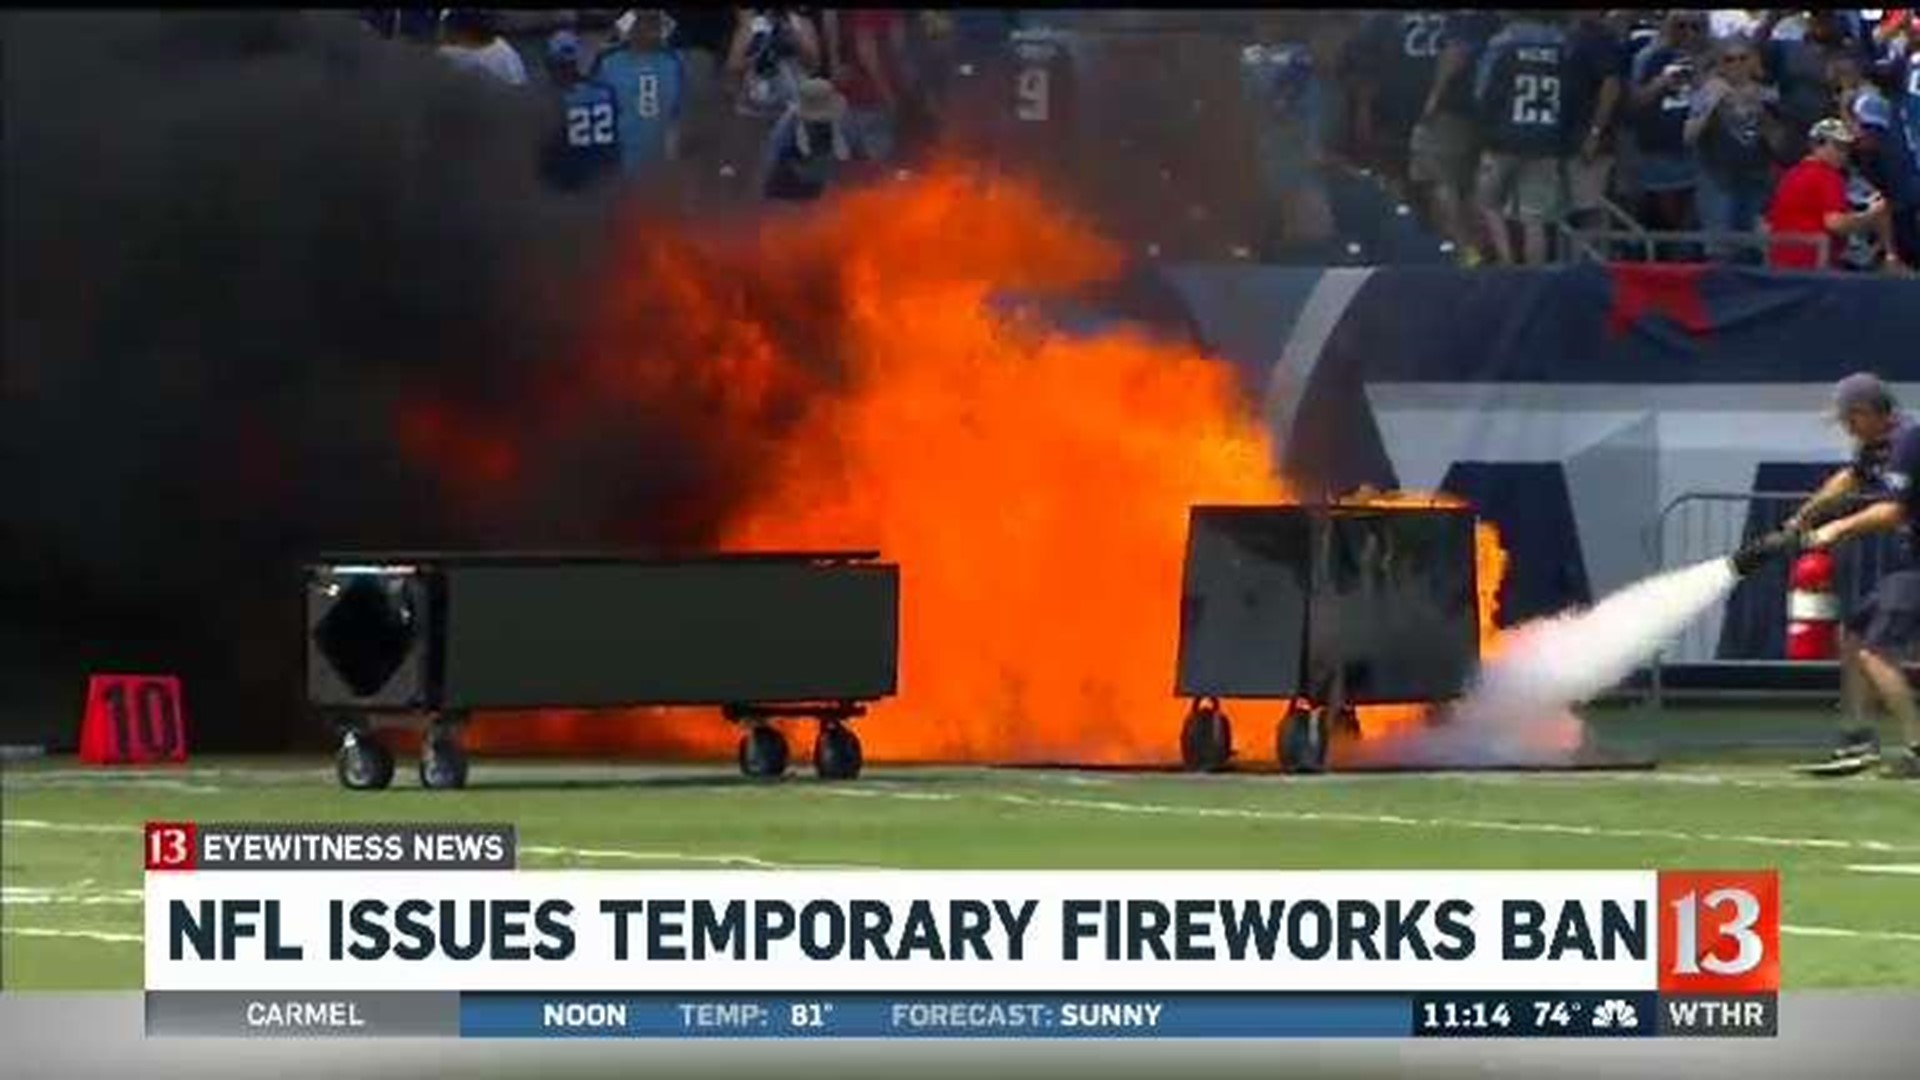 VIDEO: Pyrotechnics Set Field Ablaze Before Titans-Colts Game